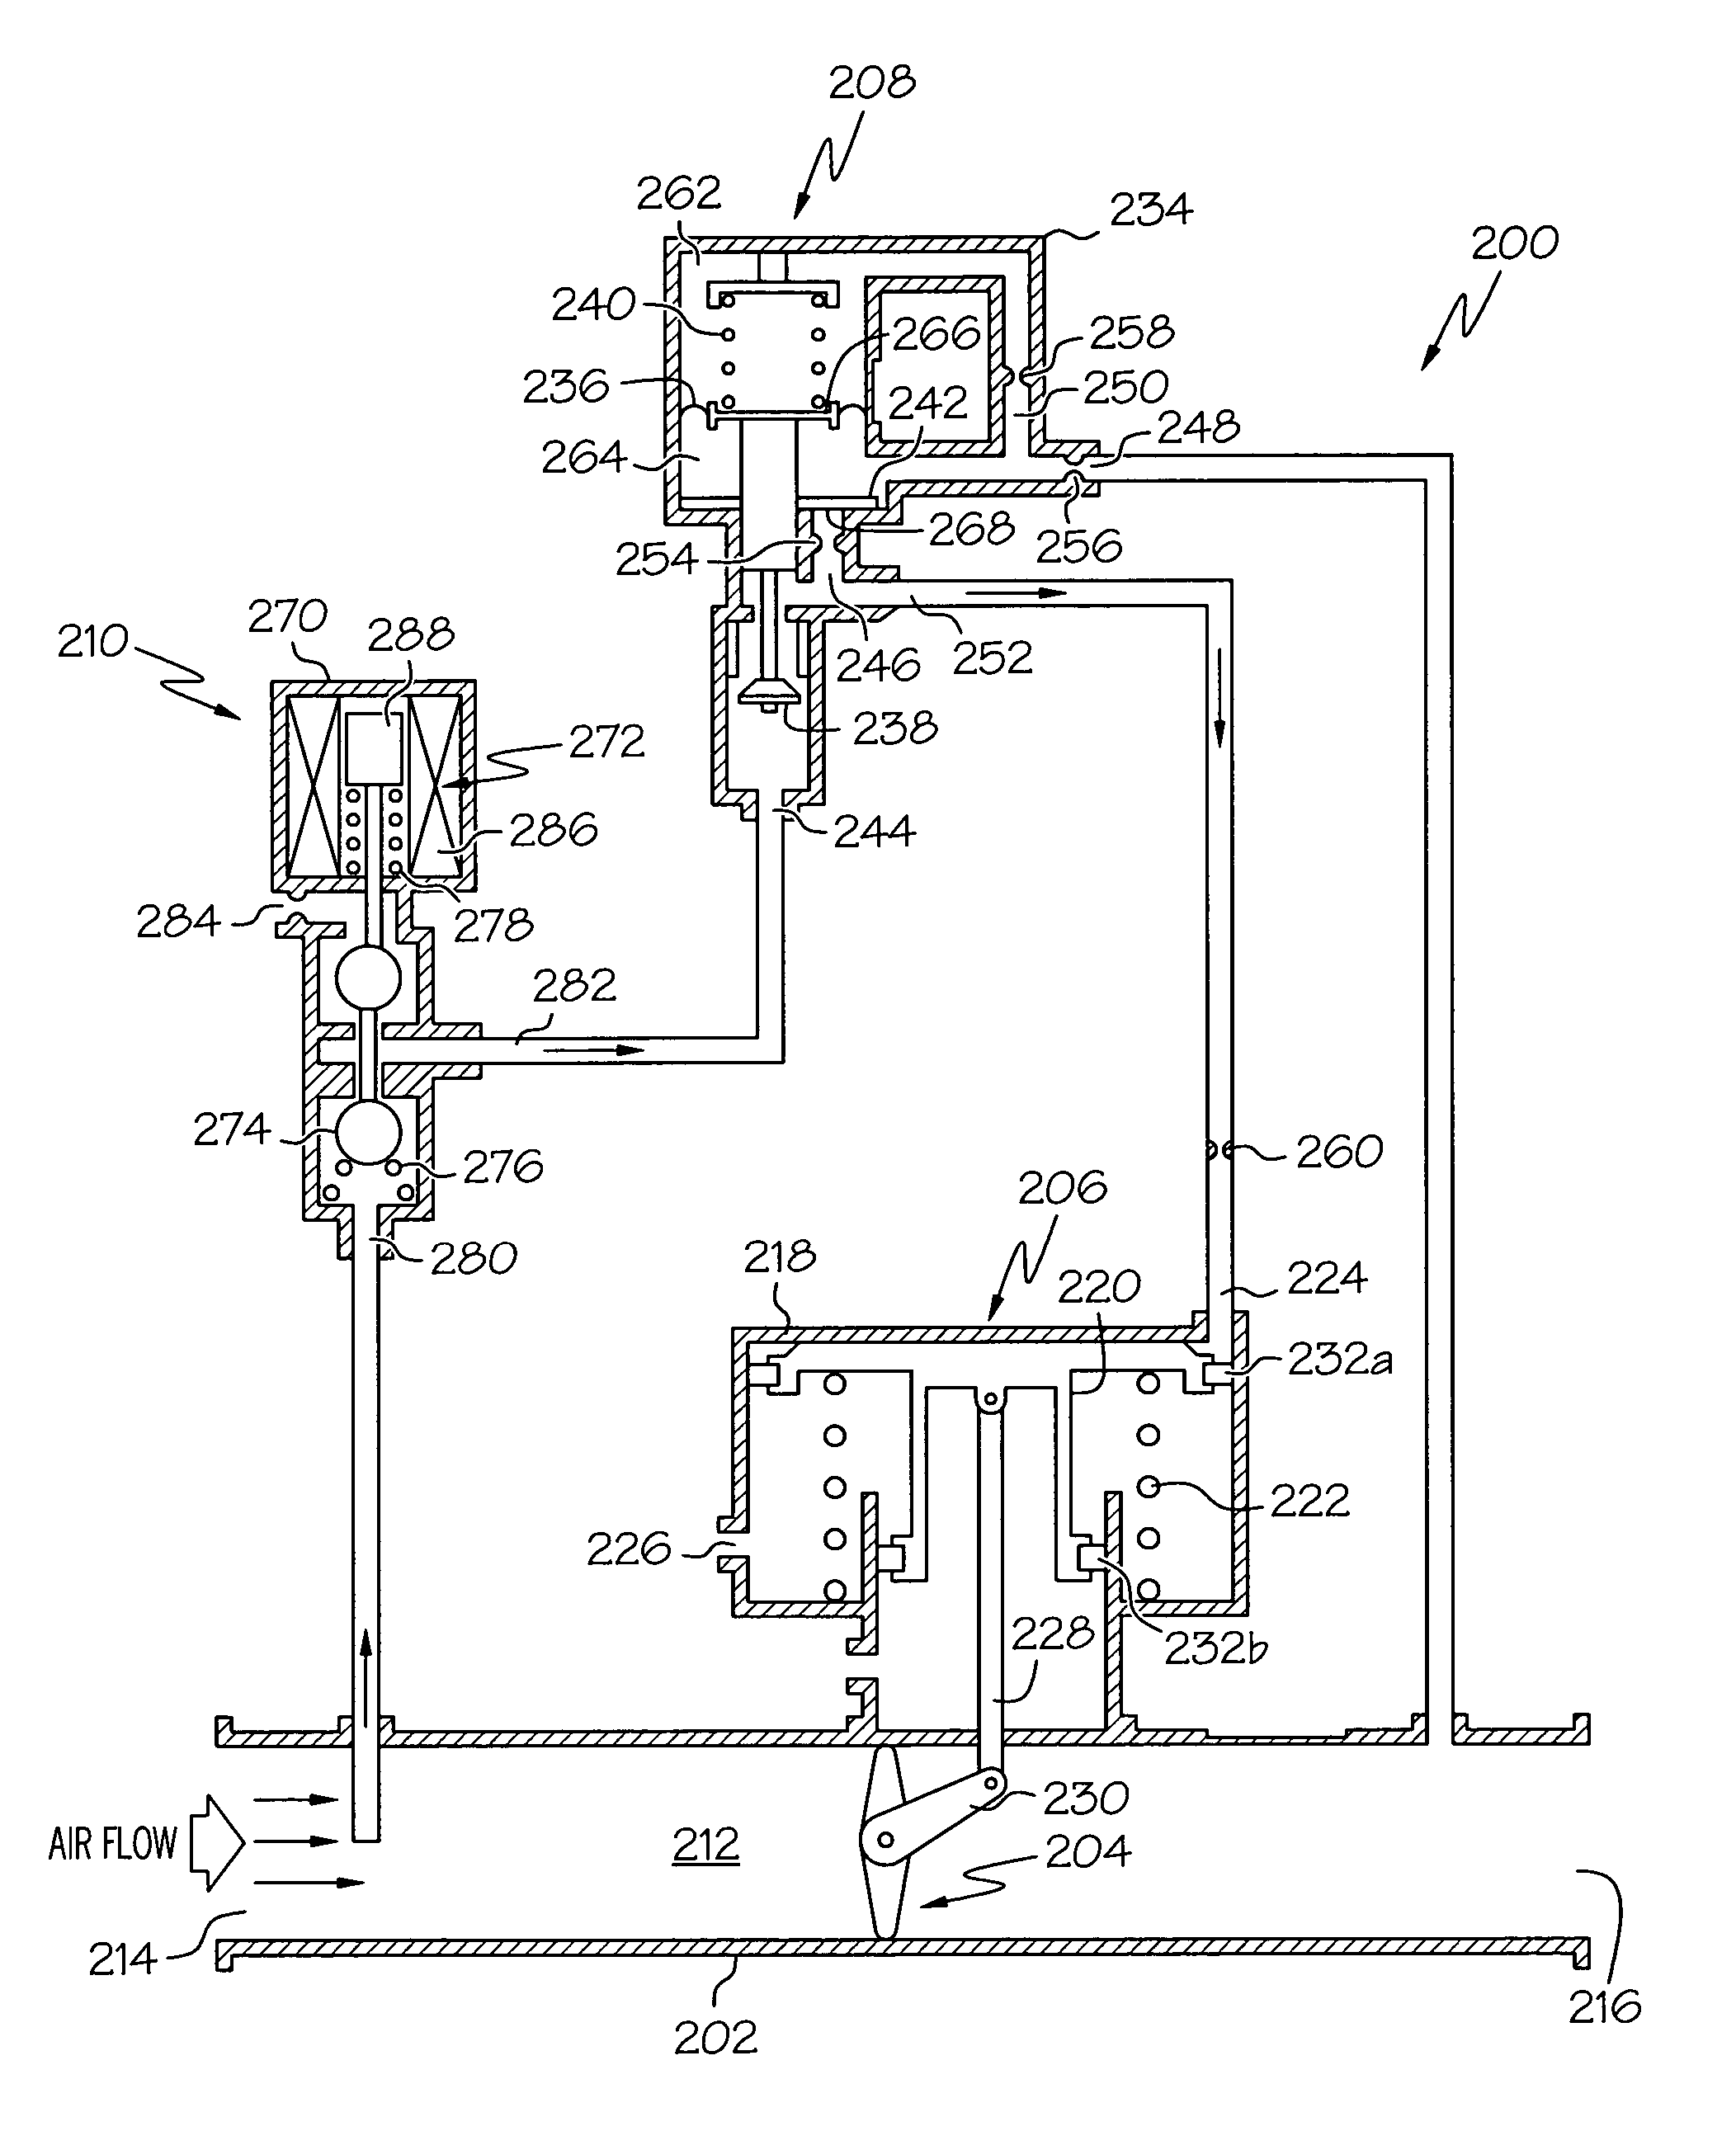 Pneumatic valve control having improved opening characteristics and an air turbine starter incorporating the same